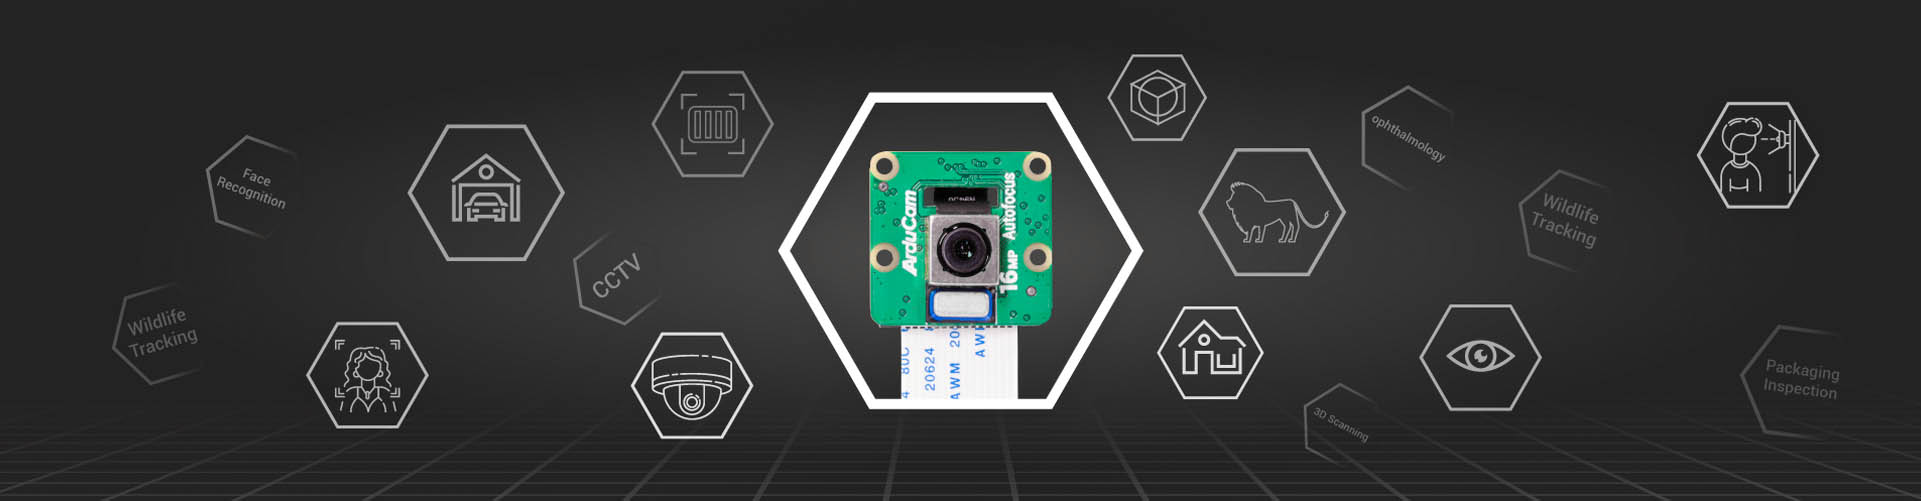 imx519 offer the best price performance ratio in embedded cameras